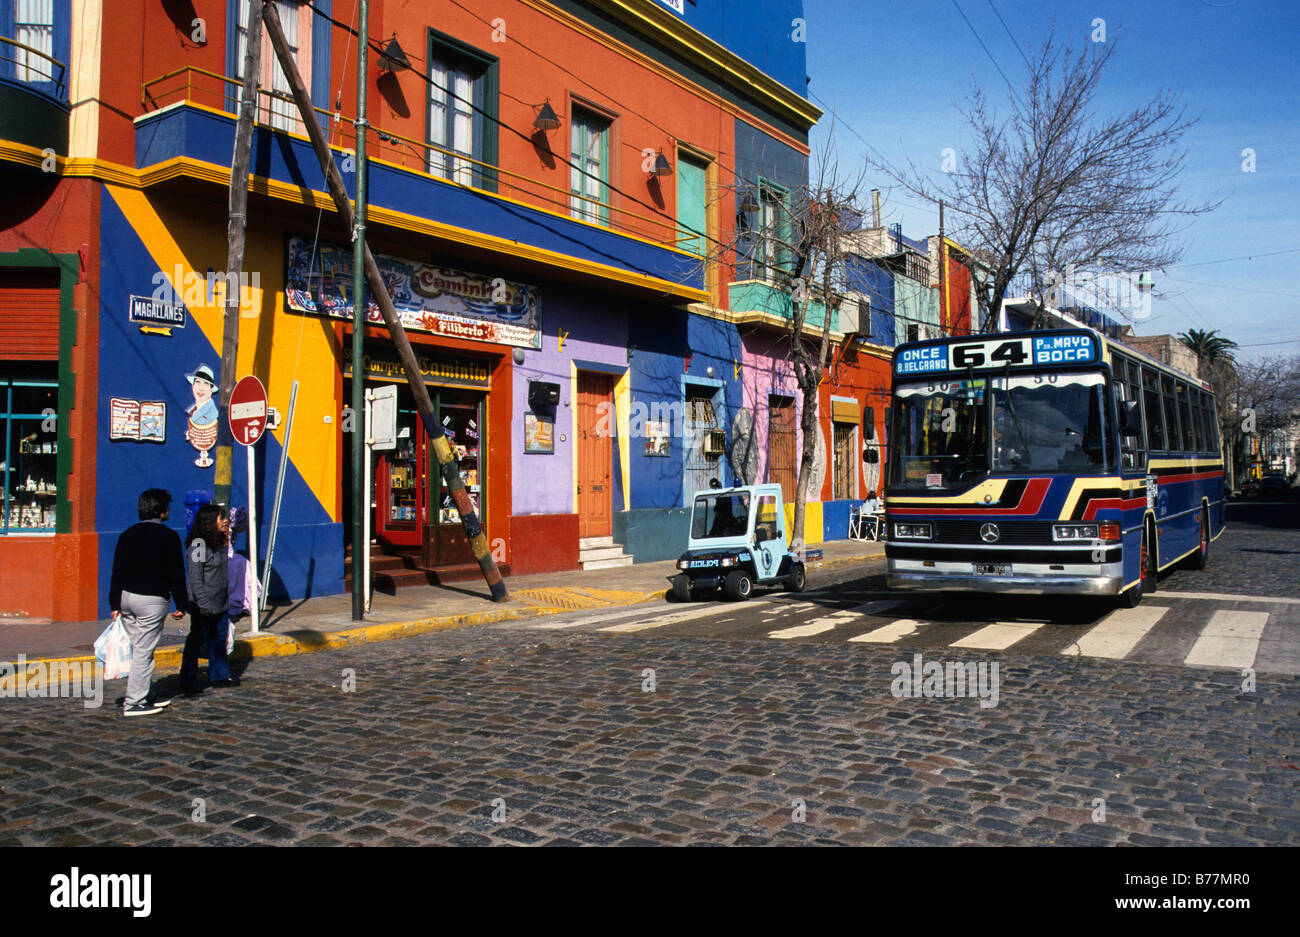 Bus in front of a colourful house facade in the dockland area La Boca, Buenos Aires, Argentina, South America Stock Photo